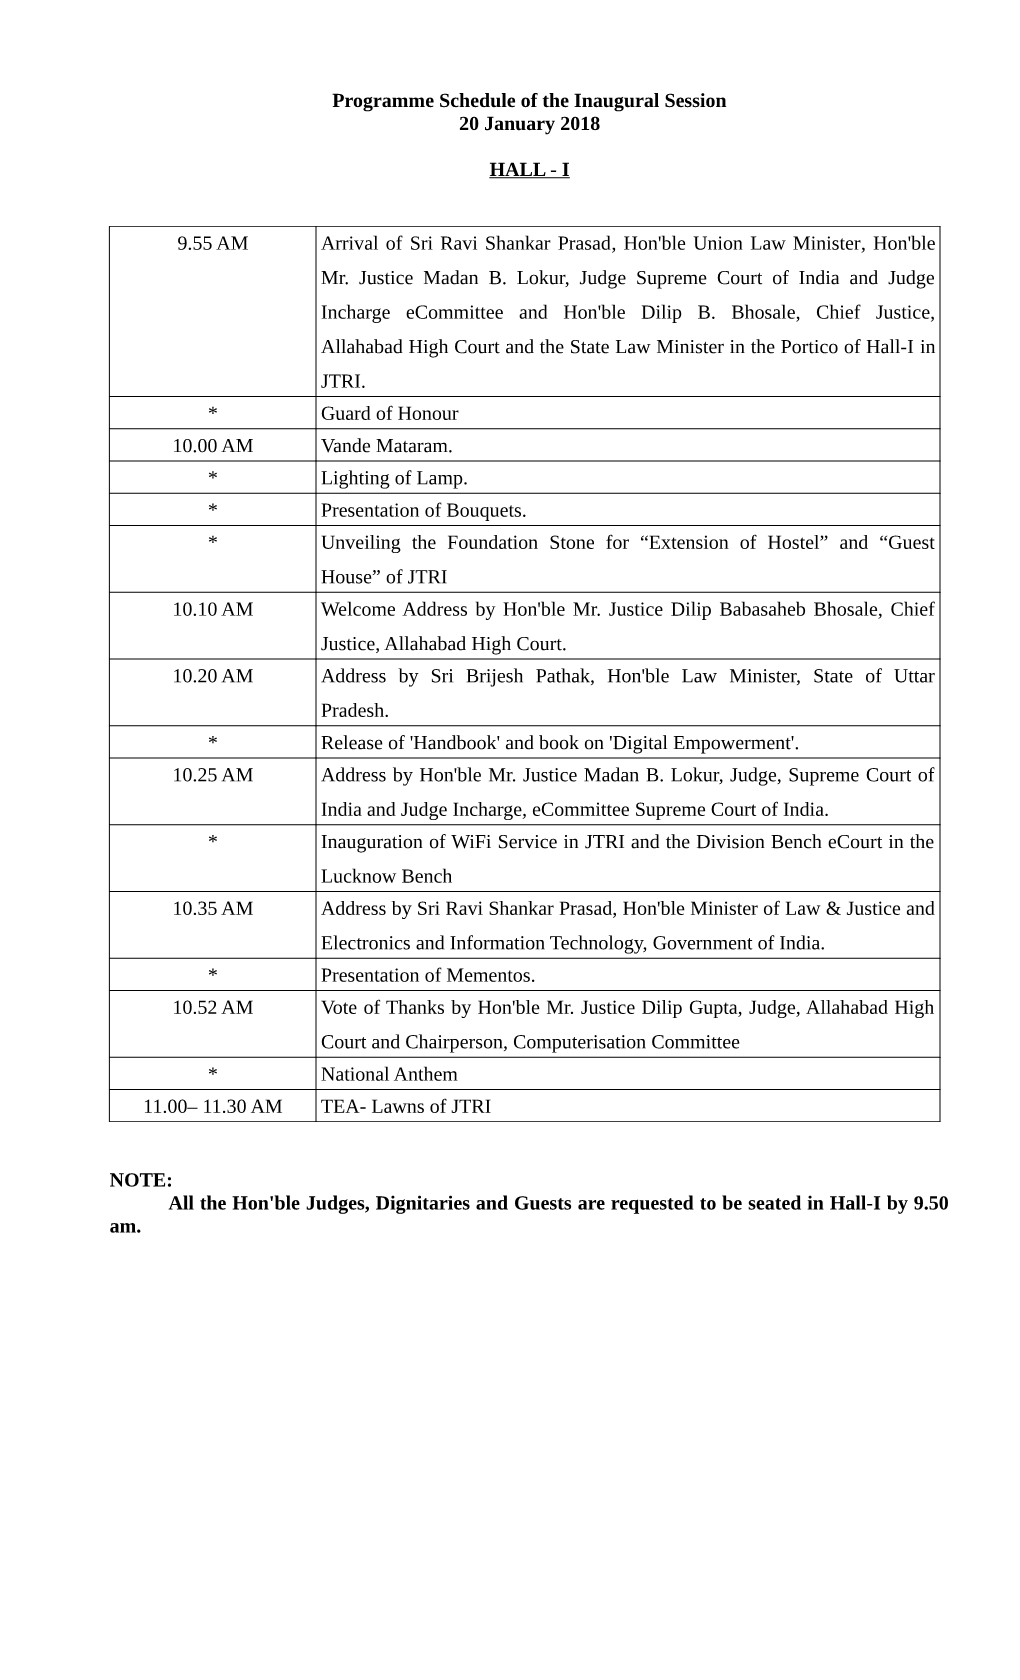 Programme Schedule of the Inaugural Session 20 January 2018 HALL